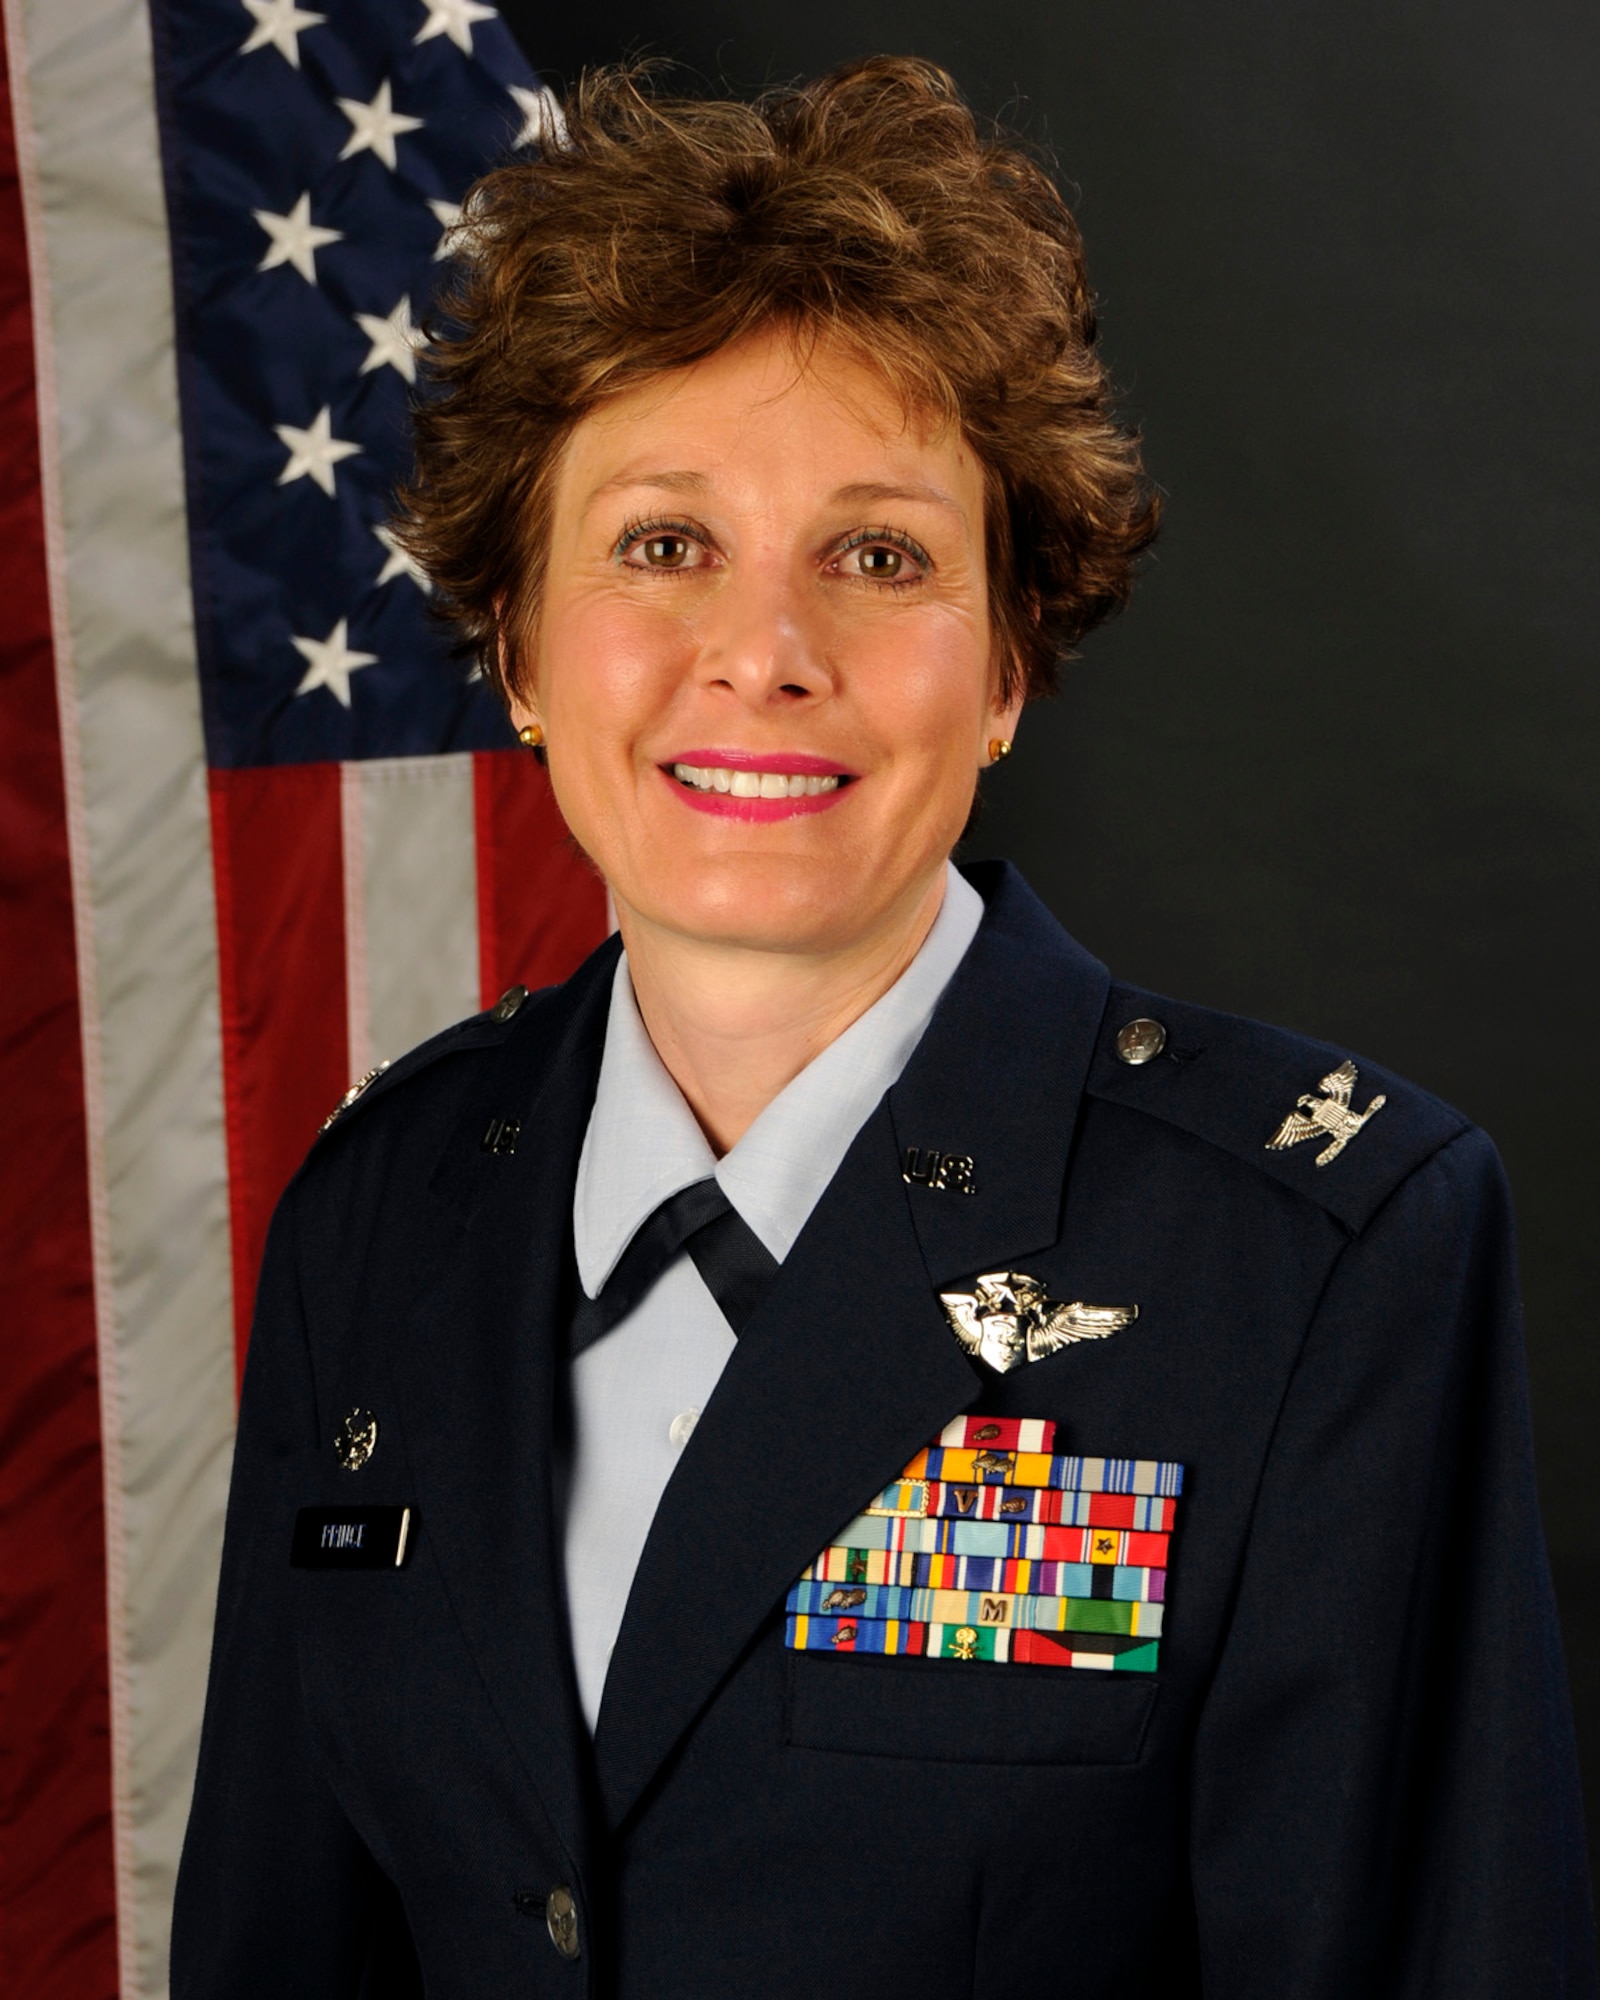 Portrait of Col. Theresa Prince, the commander of the 169th Medical Group at McEntire Joint National Guard Base, S.C., Dec. 13, 2012.  (National Guard photo by Senior Master Sgt. Edward Snyder/Released)